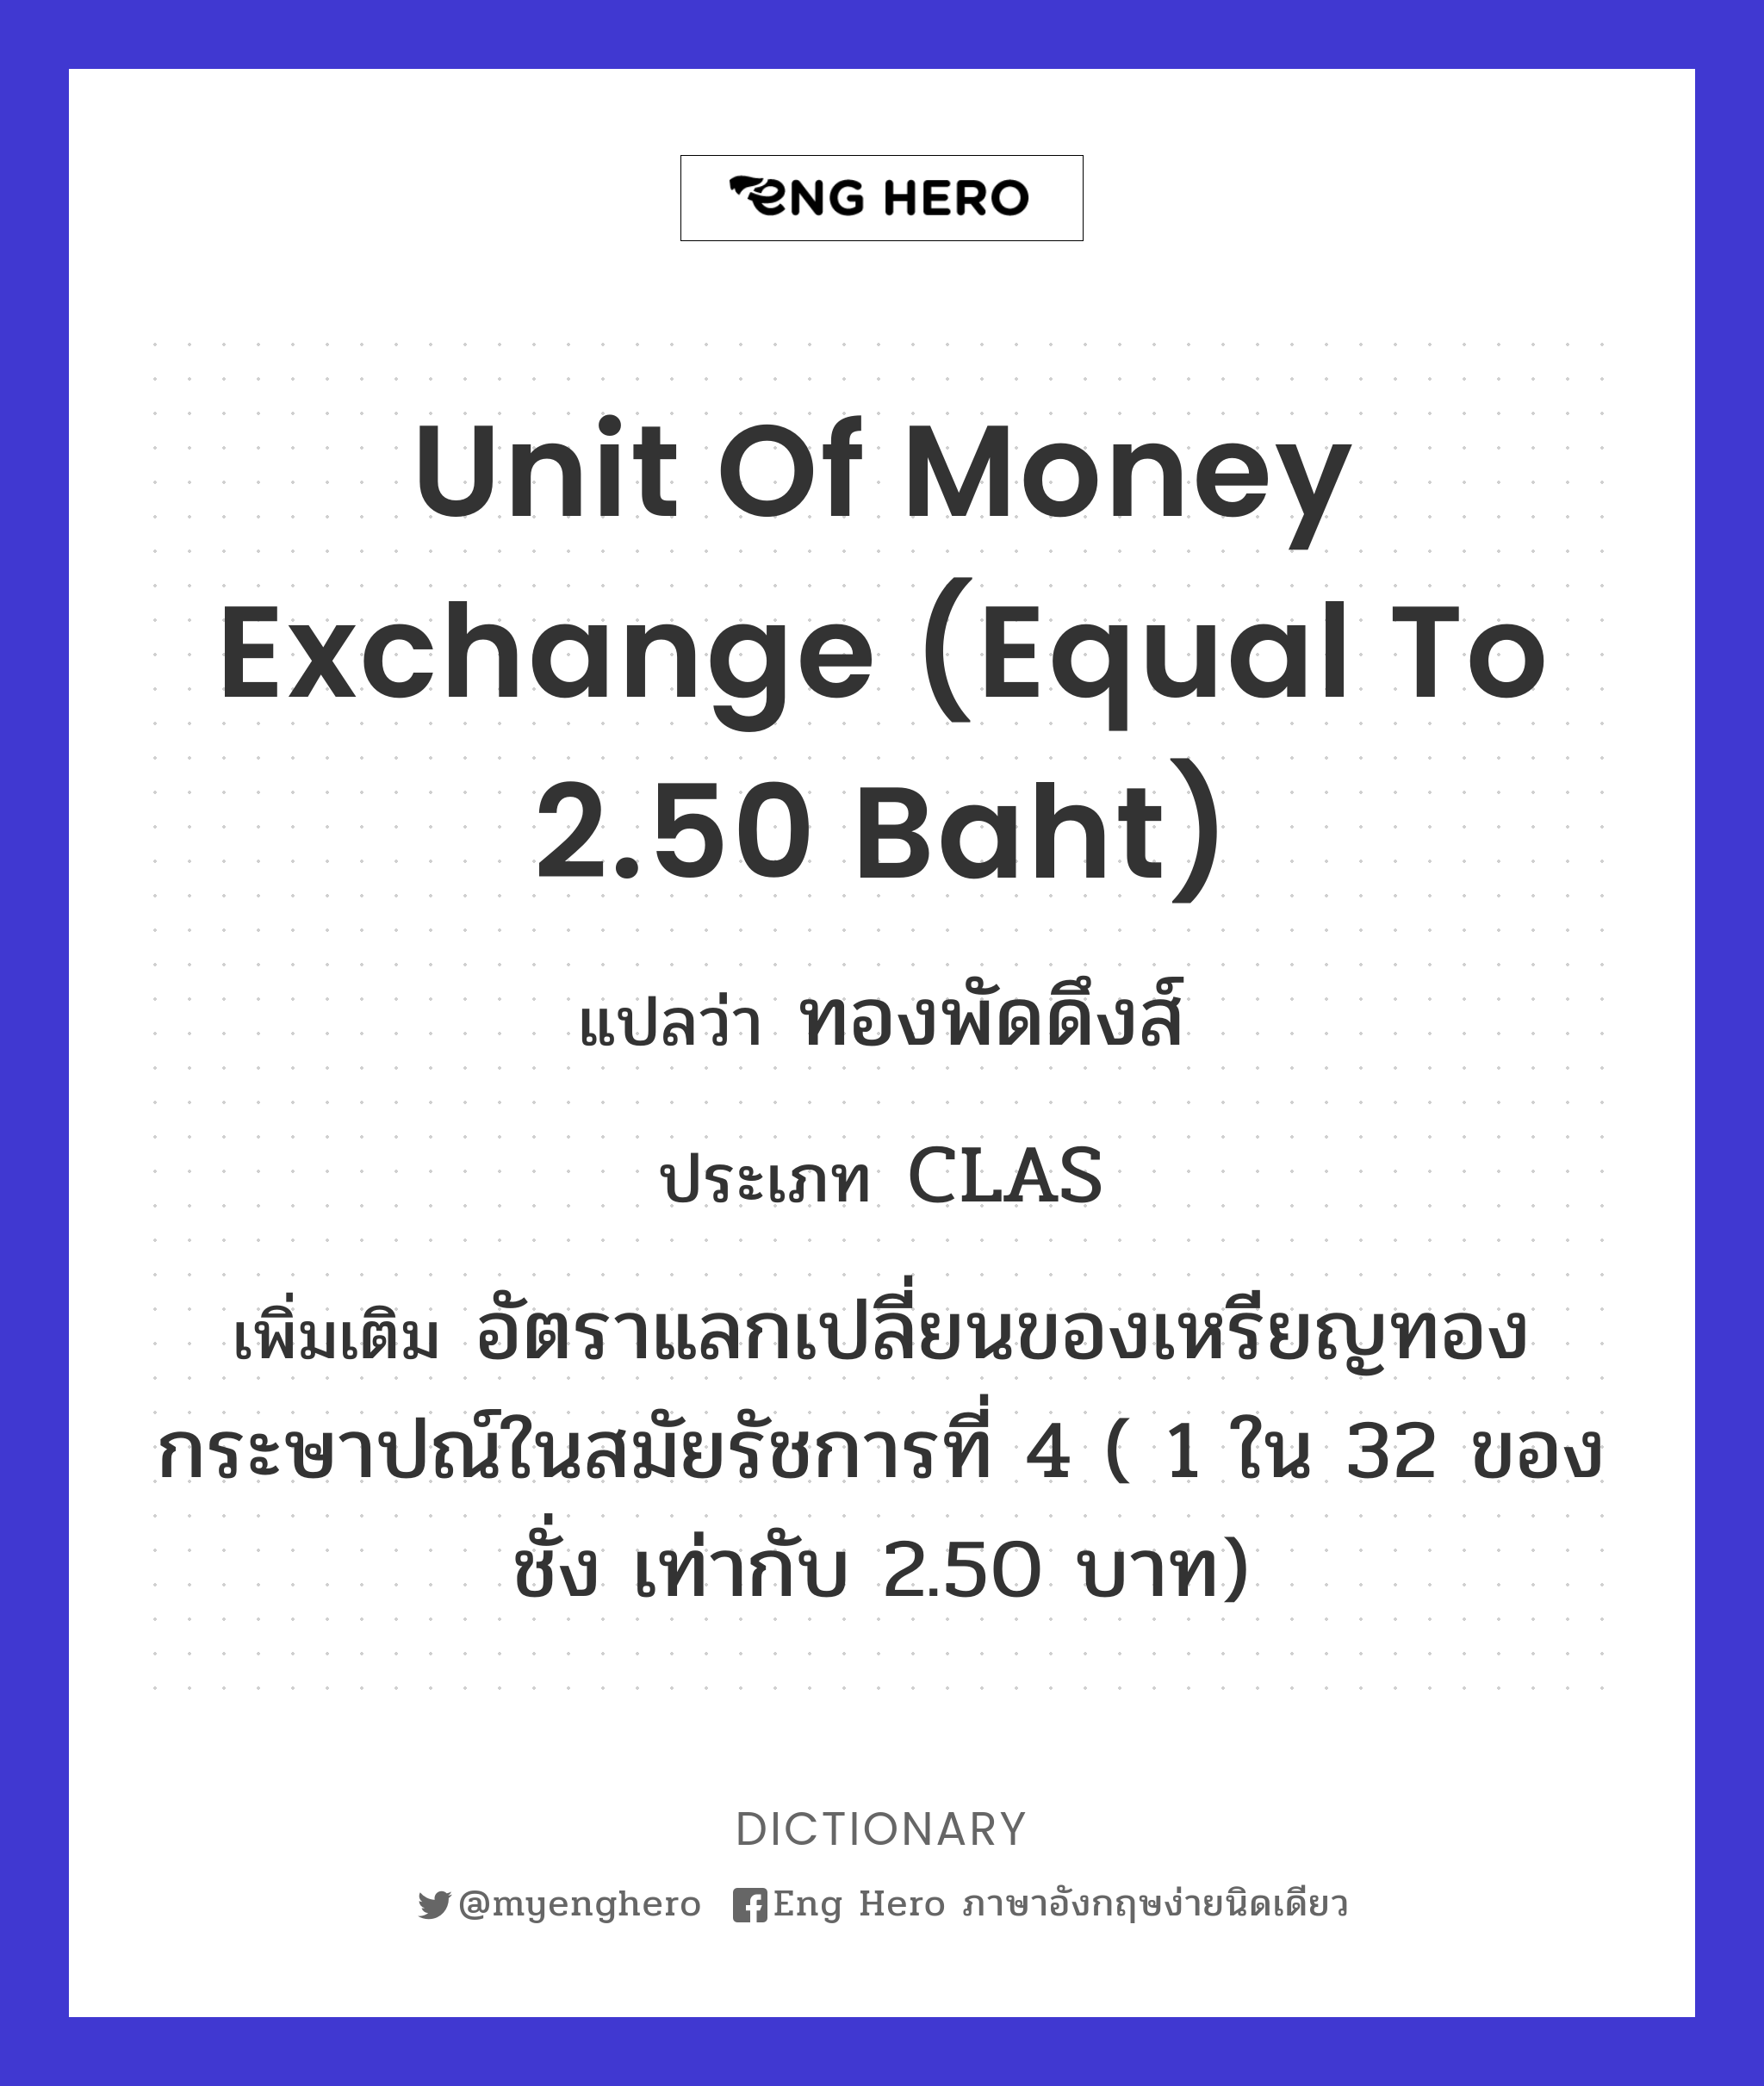 unit of money exchange (equal to 2.50 baht)